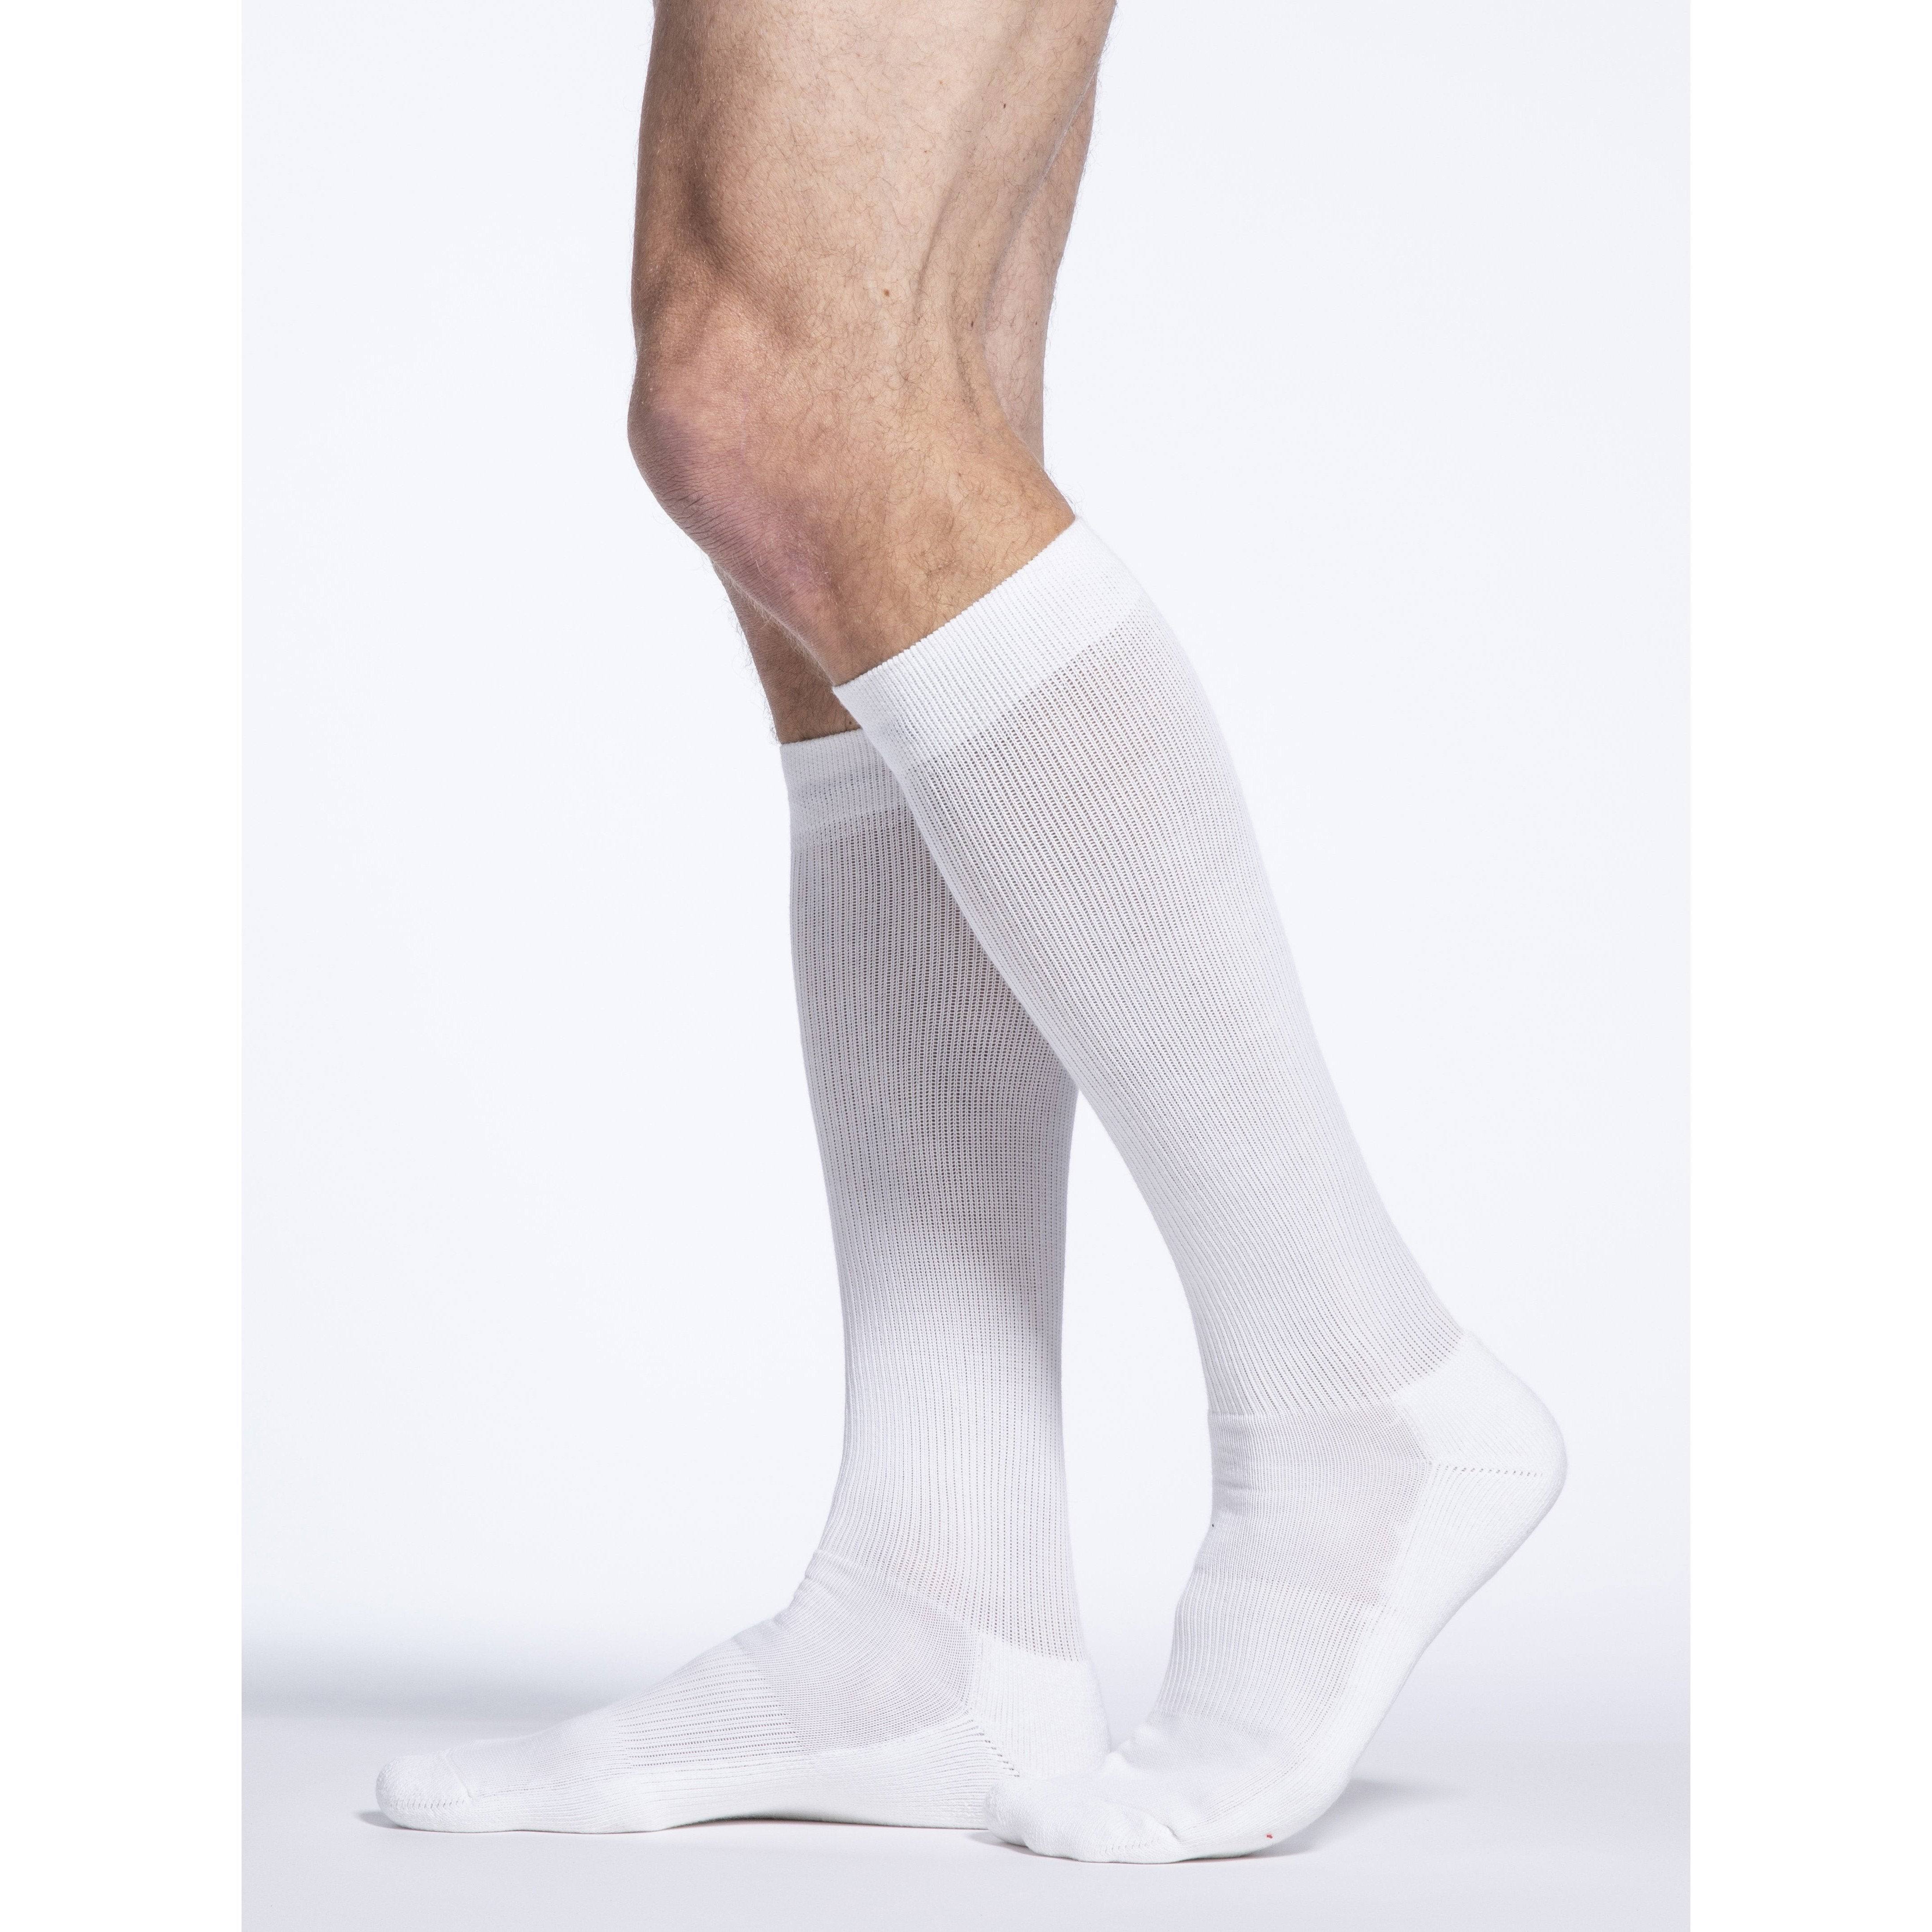 Sigvaris Men's 182 Well Being Cushioned Comfort Sock - White, 15-20mmHg